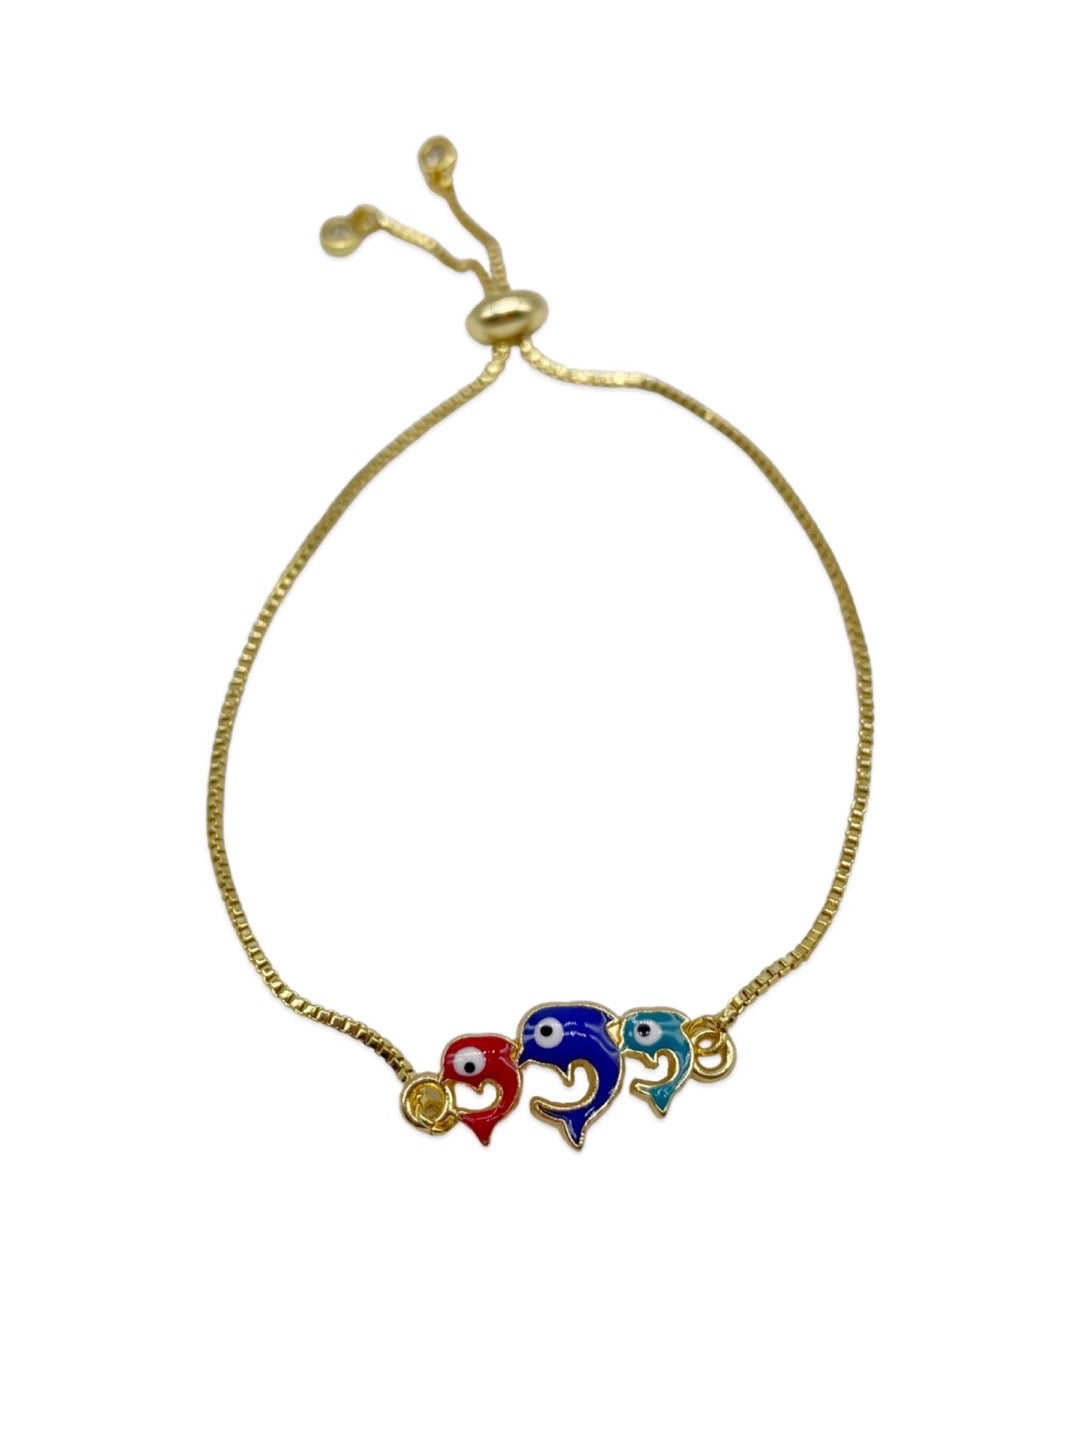 Crown of India gold plated charm bracelet